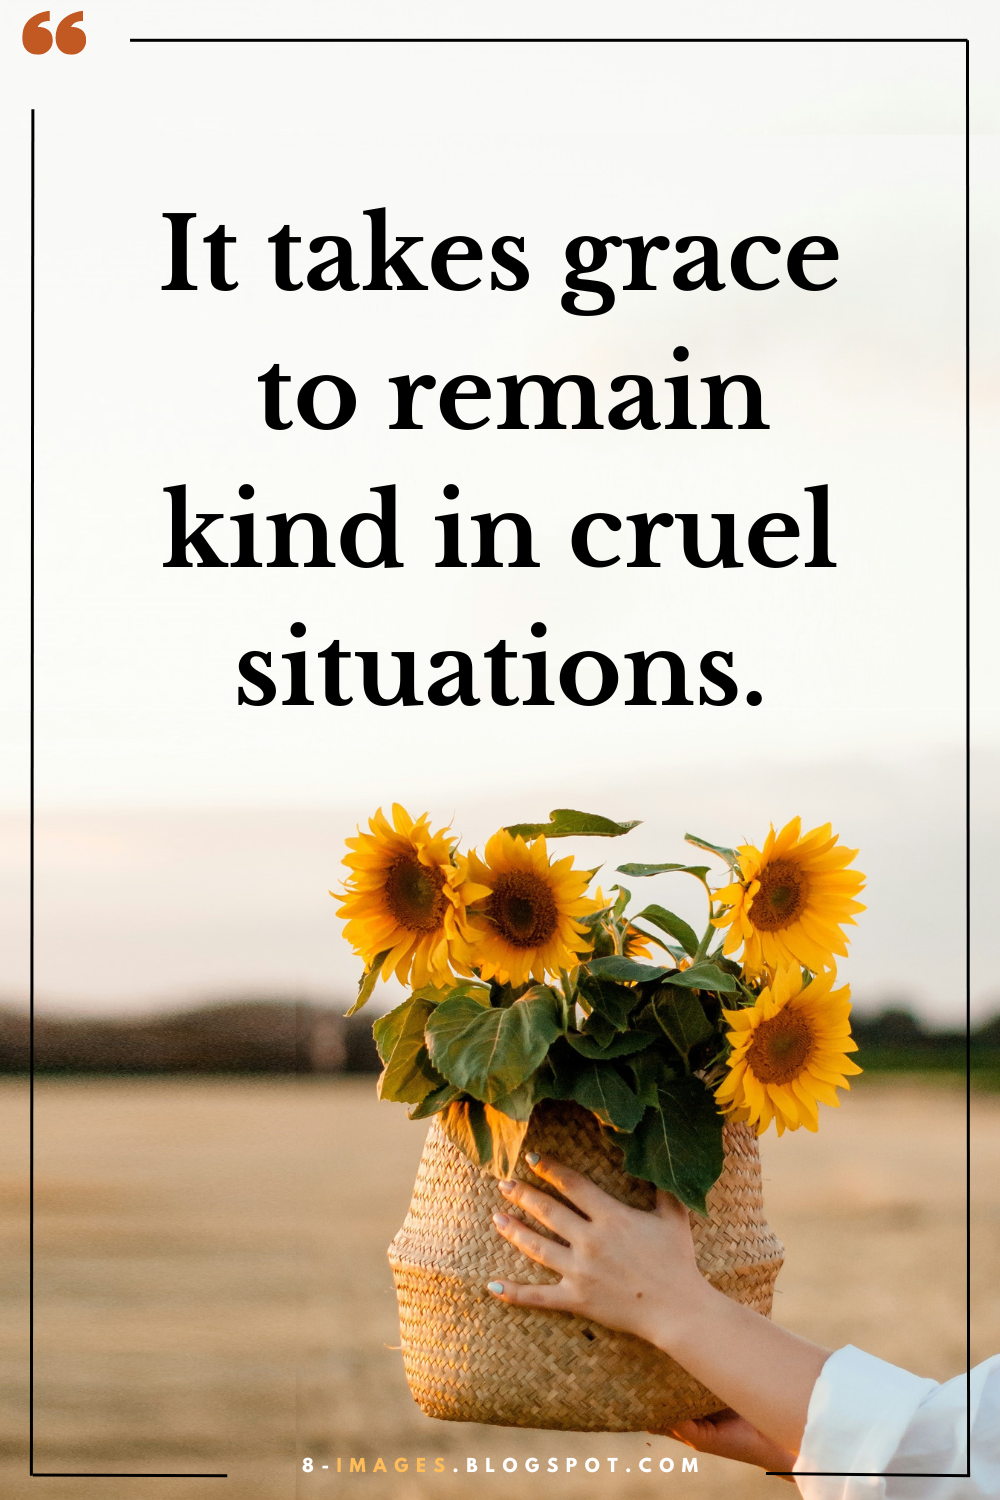 It Takes Grace To Remain Kind In Cruel Situations.